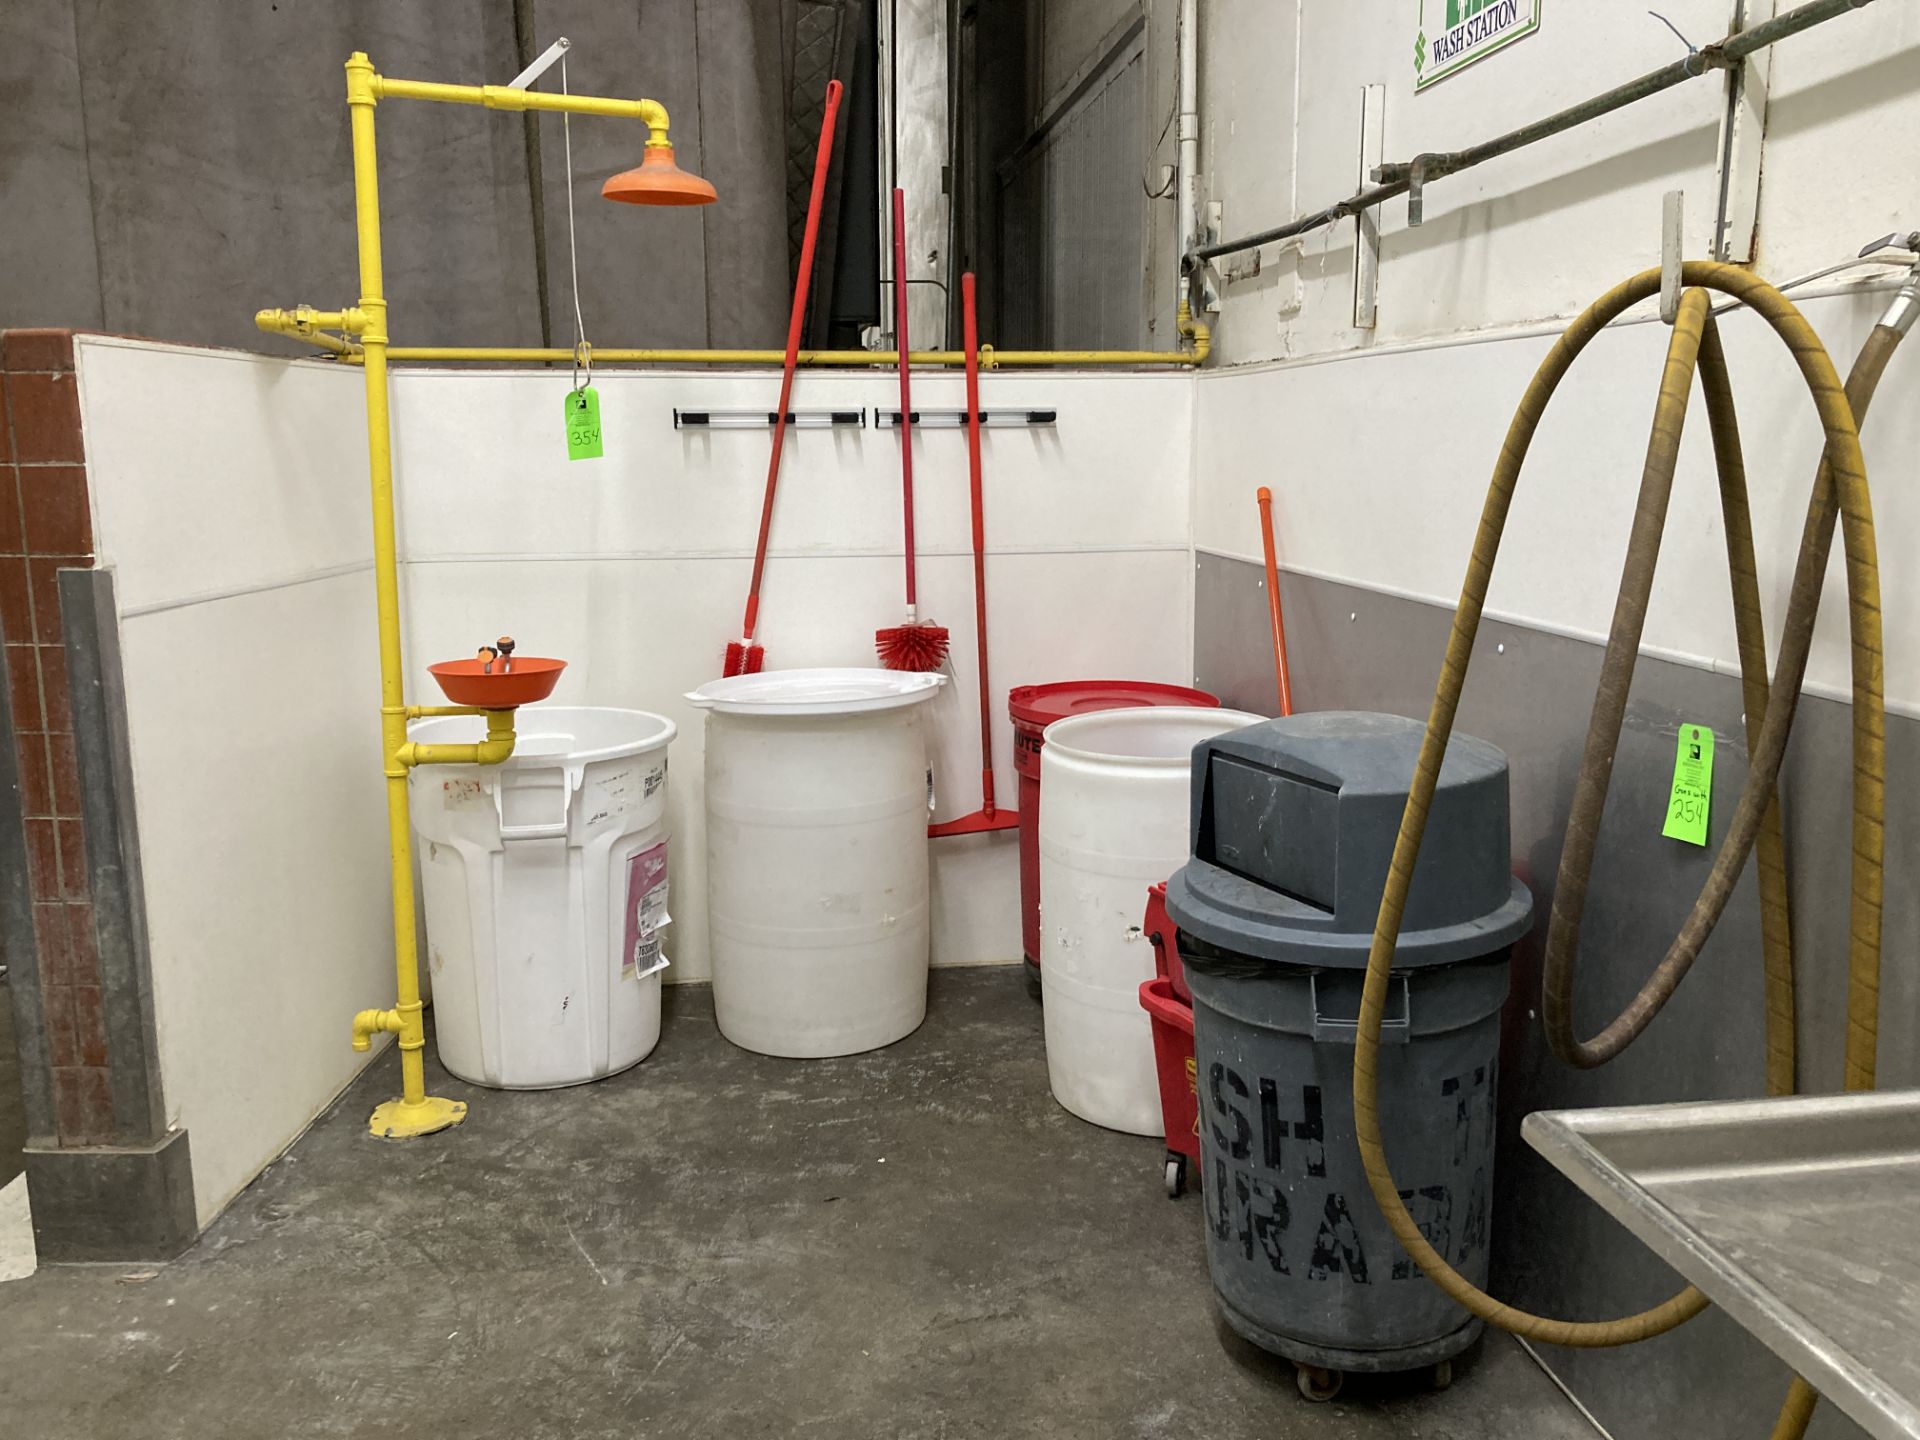 LOT OF waste containers, mop and bucket, brushes, squeegee, wall rack, eye wash shower station